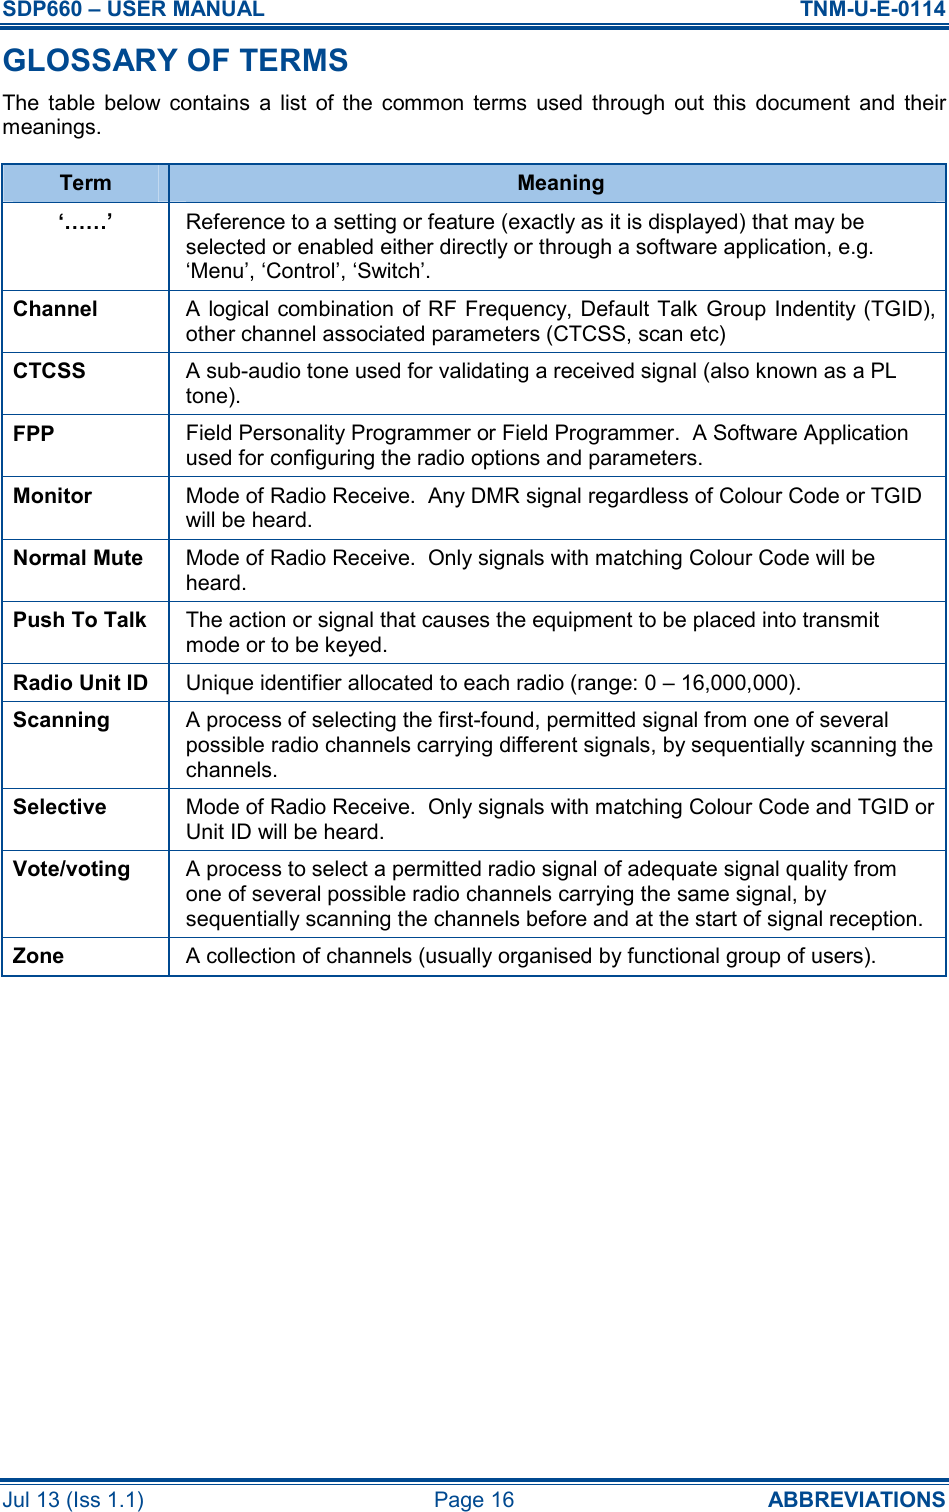 SDP660 – USER MANUAL  TNM-U-E-0114 Jul 13 (Iss 1.1)  Page 16  ABBREVIATIONS GLOSSARY OF TERMS The  table  below  contains  a  list  of  the  common  terms  used  through  out  this  document  and  their meanings. Term  Meaning ‘……’  Reference to a setting or feature (exactly as it is displayed) that may be selected or enabled either directly or through a software application, e.g. ‘Menu’, ‘Control’, ‘Switch’. Channel  A logical  combination of RF Frequency, Default Talk Group Indentity  (TGID), other channel associated parameters (CTCSS, scan etc) CTCSS  A sub-audio tone used for validating a received signal (also known as a PL tone). FPP  Field Personality Programmer or Field Programmer.  A Software Application used for configuring the radio options and parameters. Monitor  Mode of Radio Receive.  Any DMR signal regardless of Colour Code or TGID will be heard. Normal Mute  Mode of Radio Receive.  Only signals with matching Colour Code will be heard. Push To Talk  The action or signal that causes the equipment to be placed into transmit mode or to be keyed. Radio Unit ID  Unique identifier allocated to each radio (range: 0 – 16,000,000). Scanning  A process of selecting the first-found, permitted signal from one of several possible radio channels carrying different signals, by sequentially scanning the channels. Selective  Mode of Radio Receive.  Only signals with matching Colour Code and TGID or Unit ID will be heard. Vote/voting  A process to select a permitted radio signal of adequate signal quality from one of several possible radio channels carrying the same signal, by sequentially scanning the channels before and at the start of signal reception. Zone  A collection of channels (usually organised by functional group of users).     